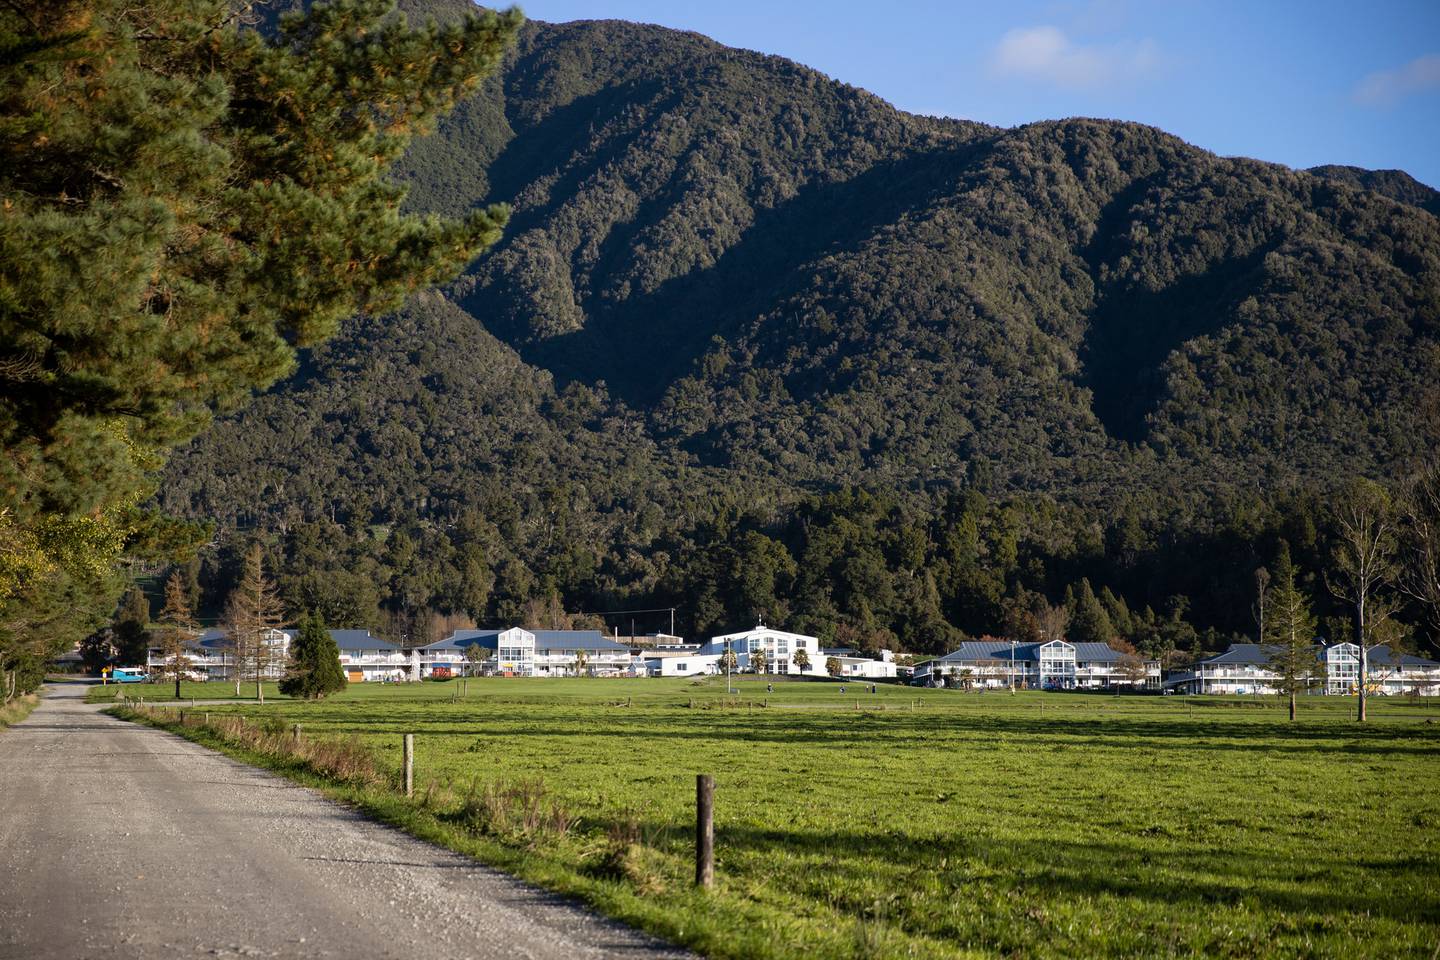 NZ Herald – Covid at Gloriavale: ‘Significant cluster’ inside closed West Coast religious community